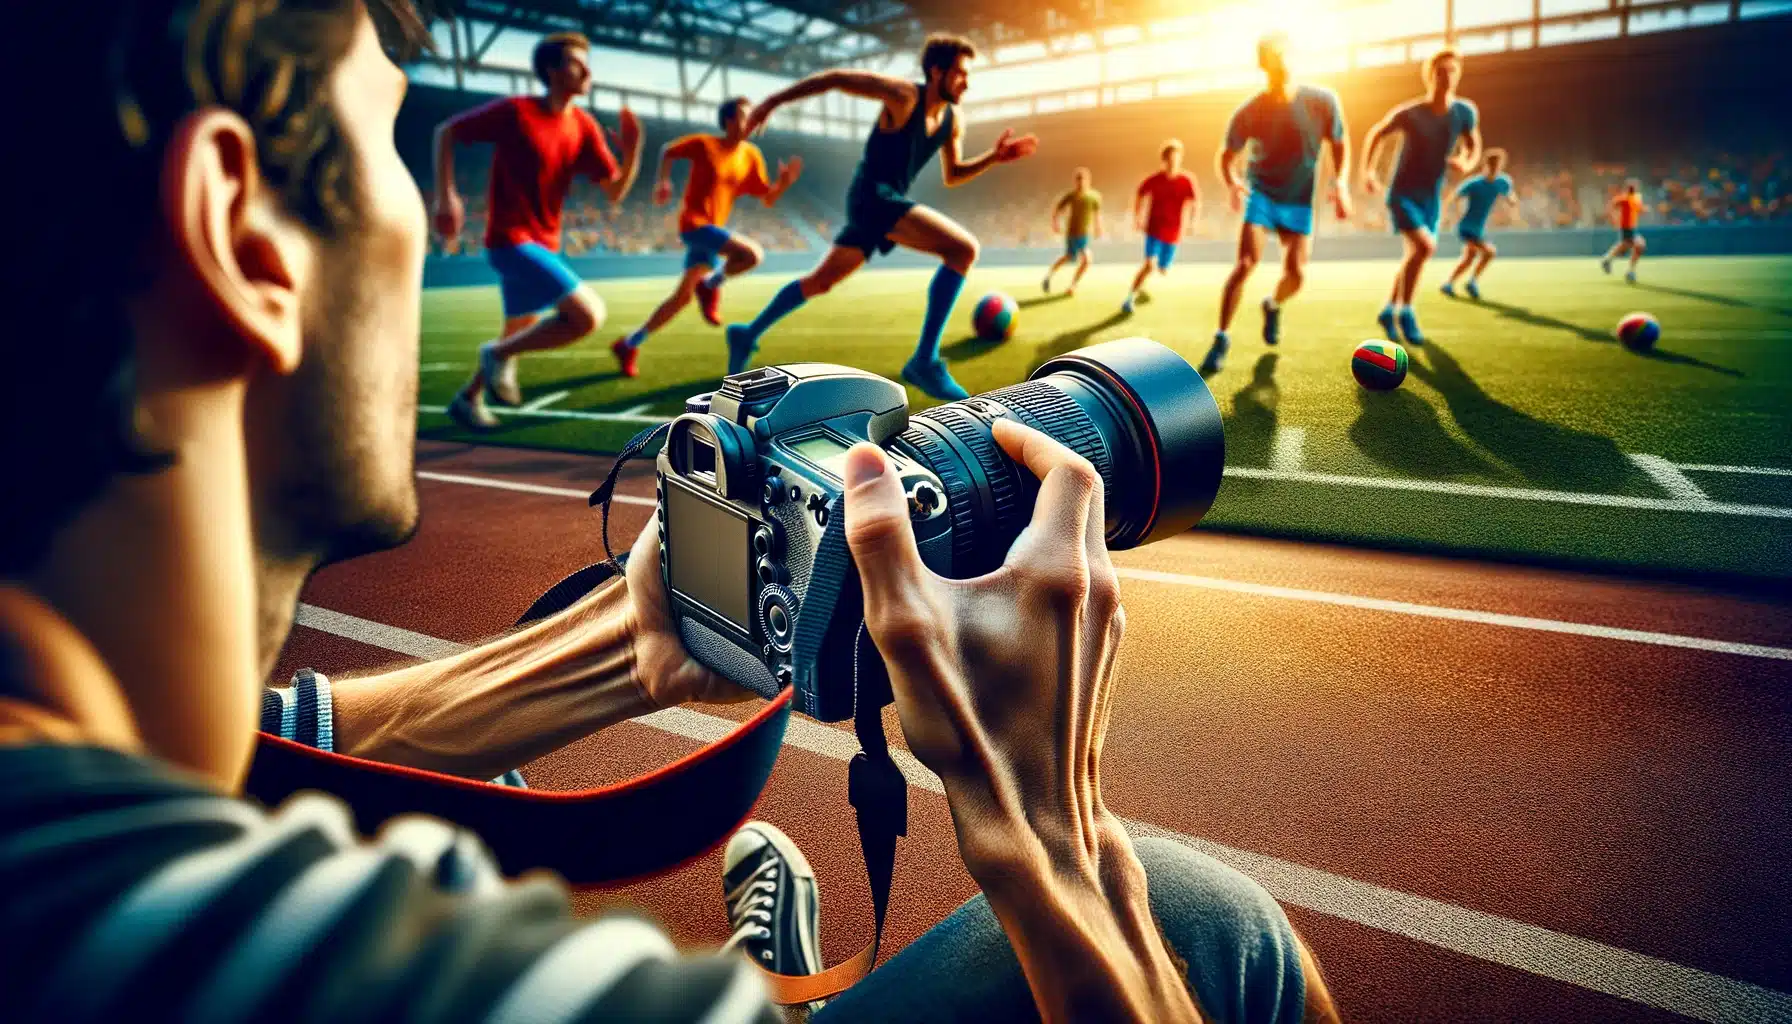 Sports photographer capturing live action on the ground, demonstrating sports photography and sports photography tips.